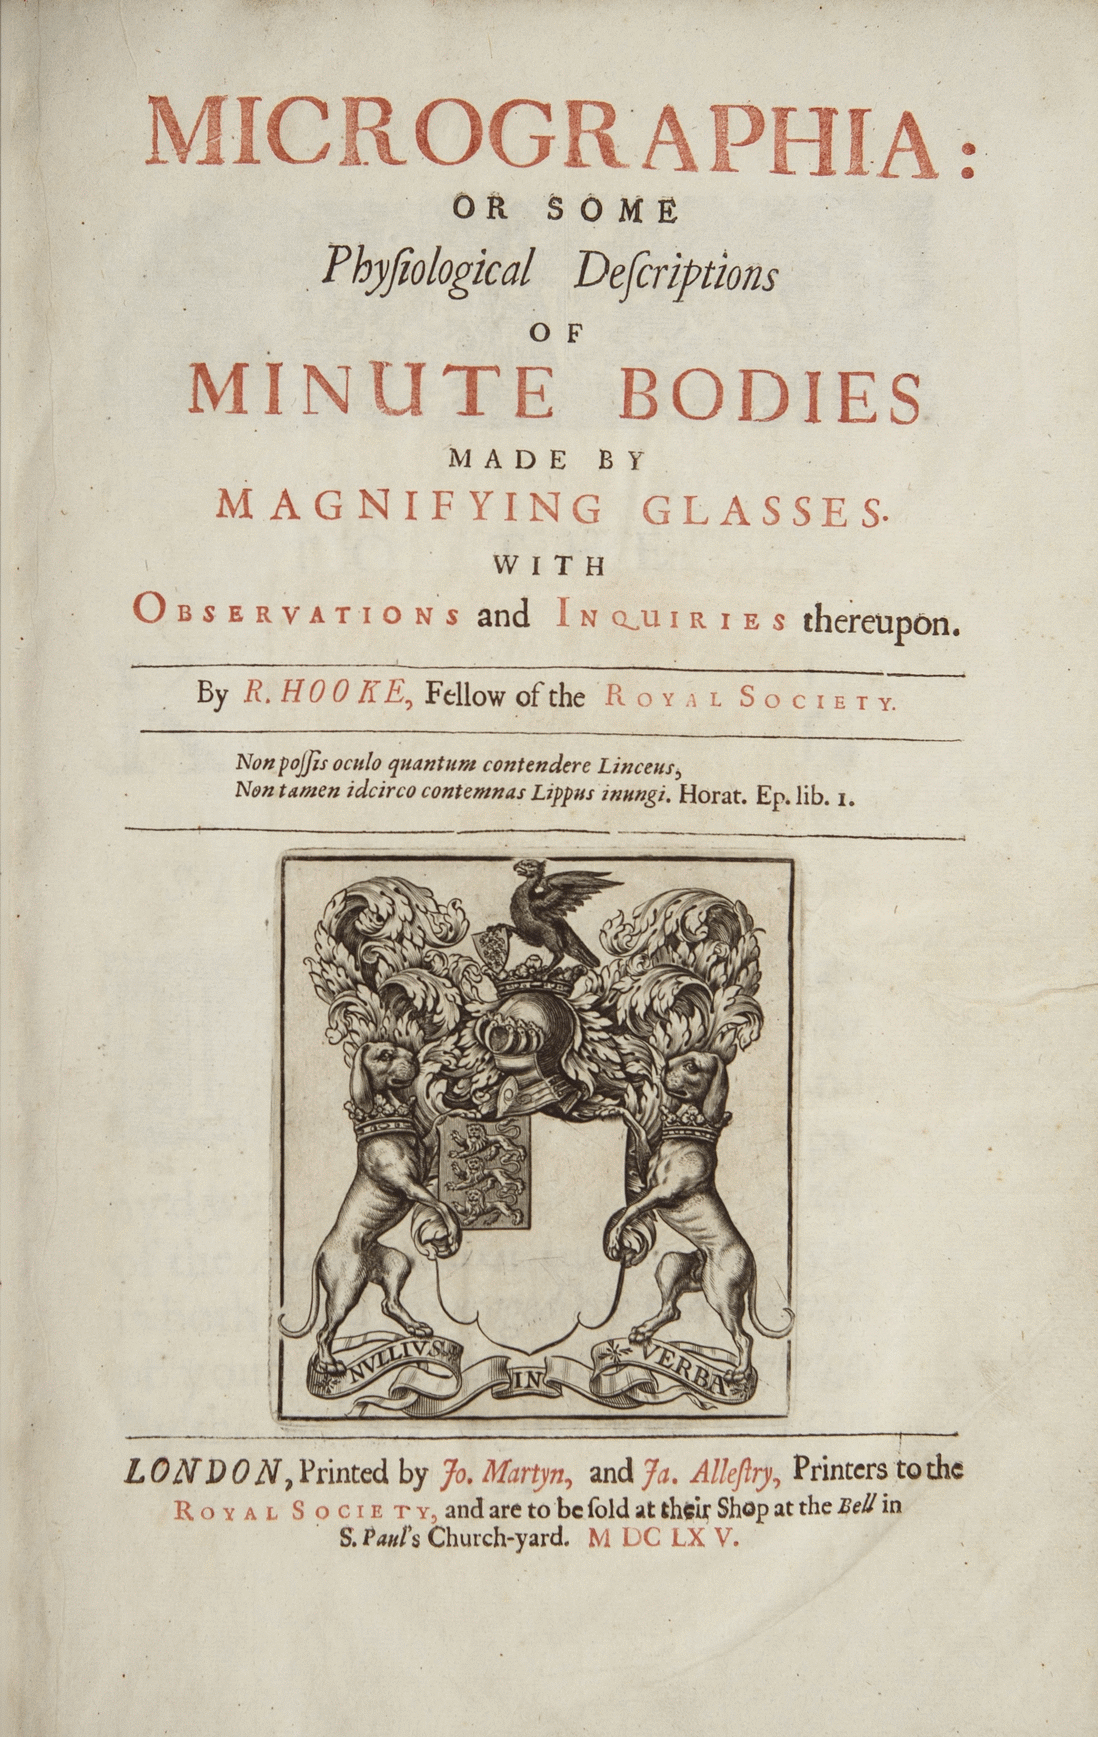 Title page of “MICROGRAPHIA or some physiological descriptions of minute bodies made by magnifying glasses with observations and inquiries thereupon”.